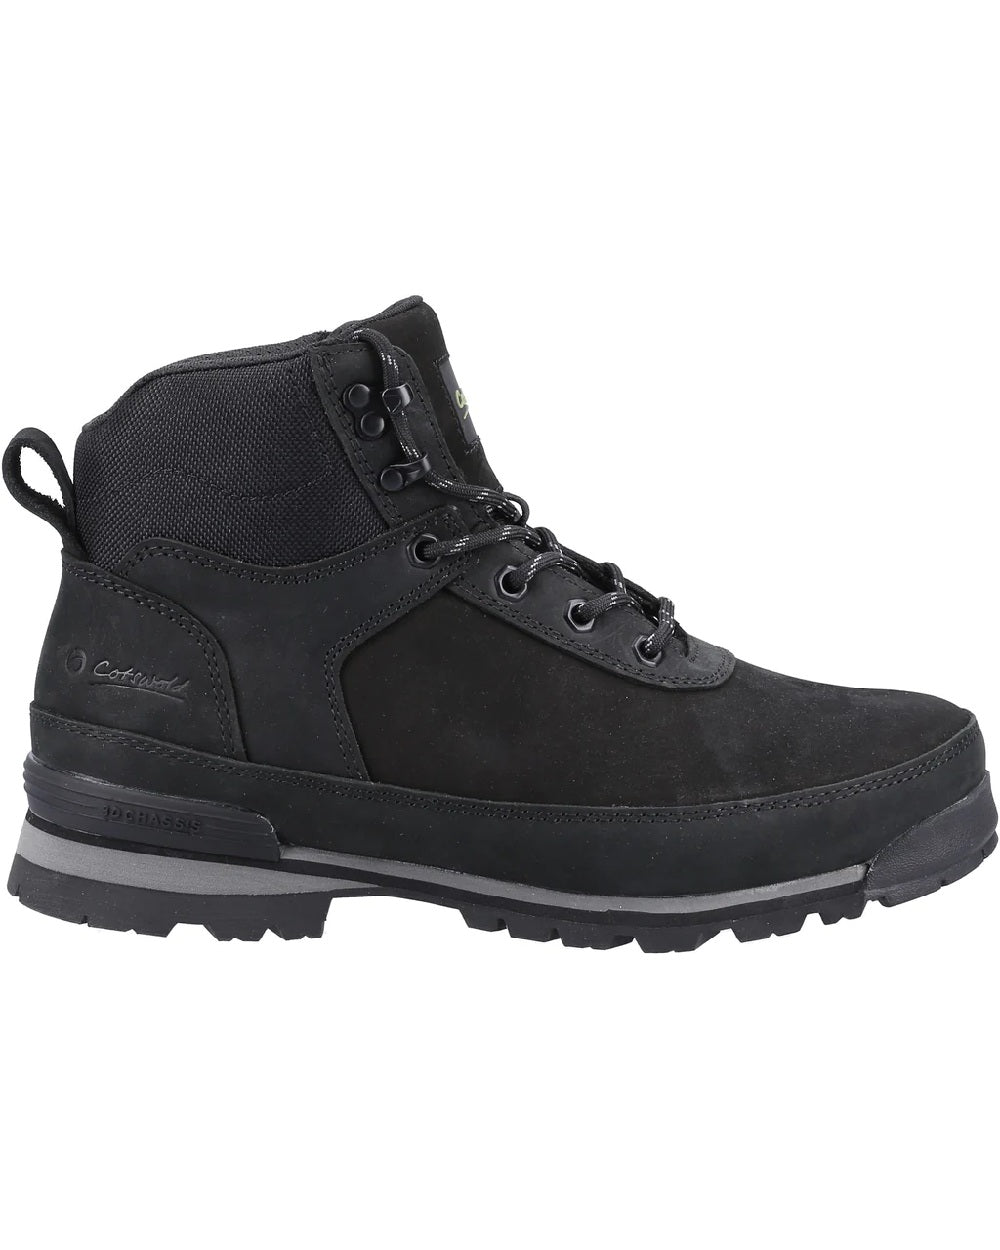 Cotswold Mens Yanworth Hiking Boots in Black 